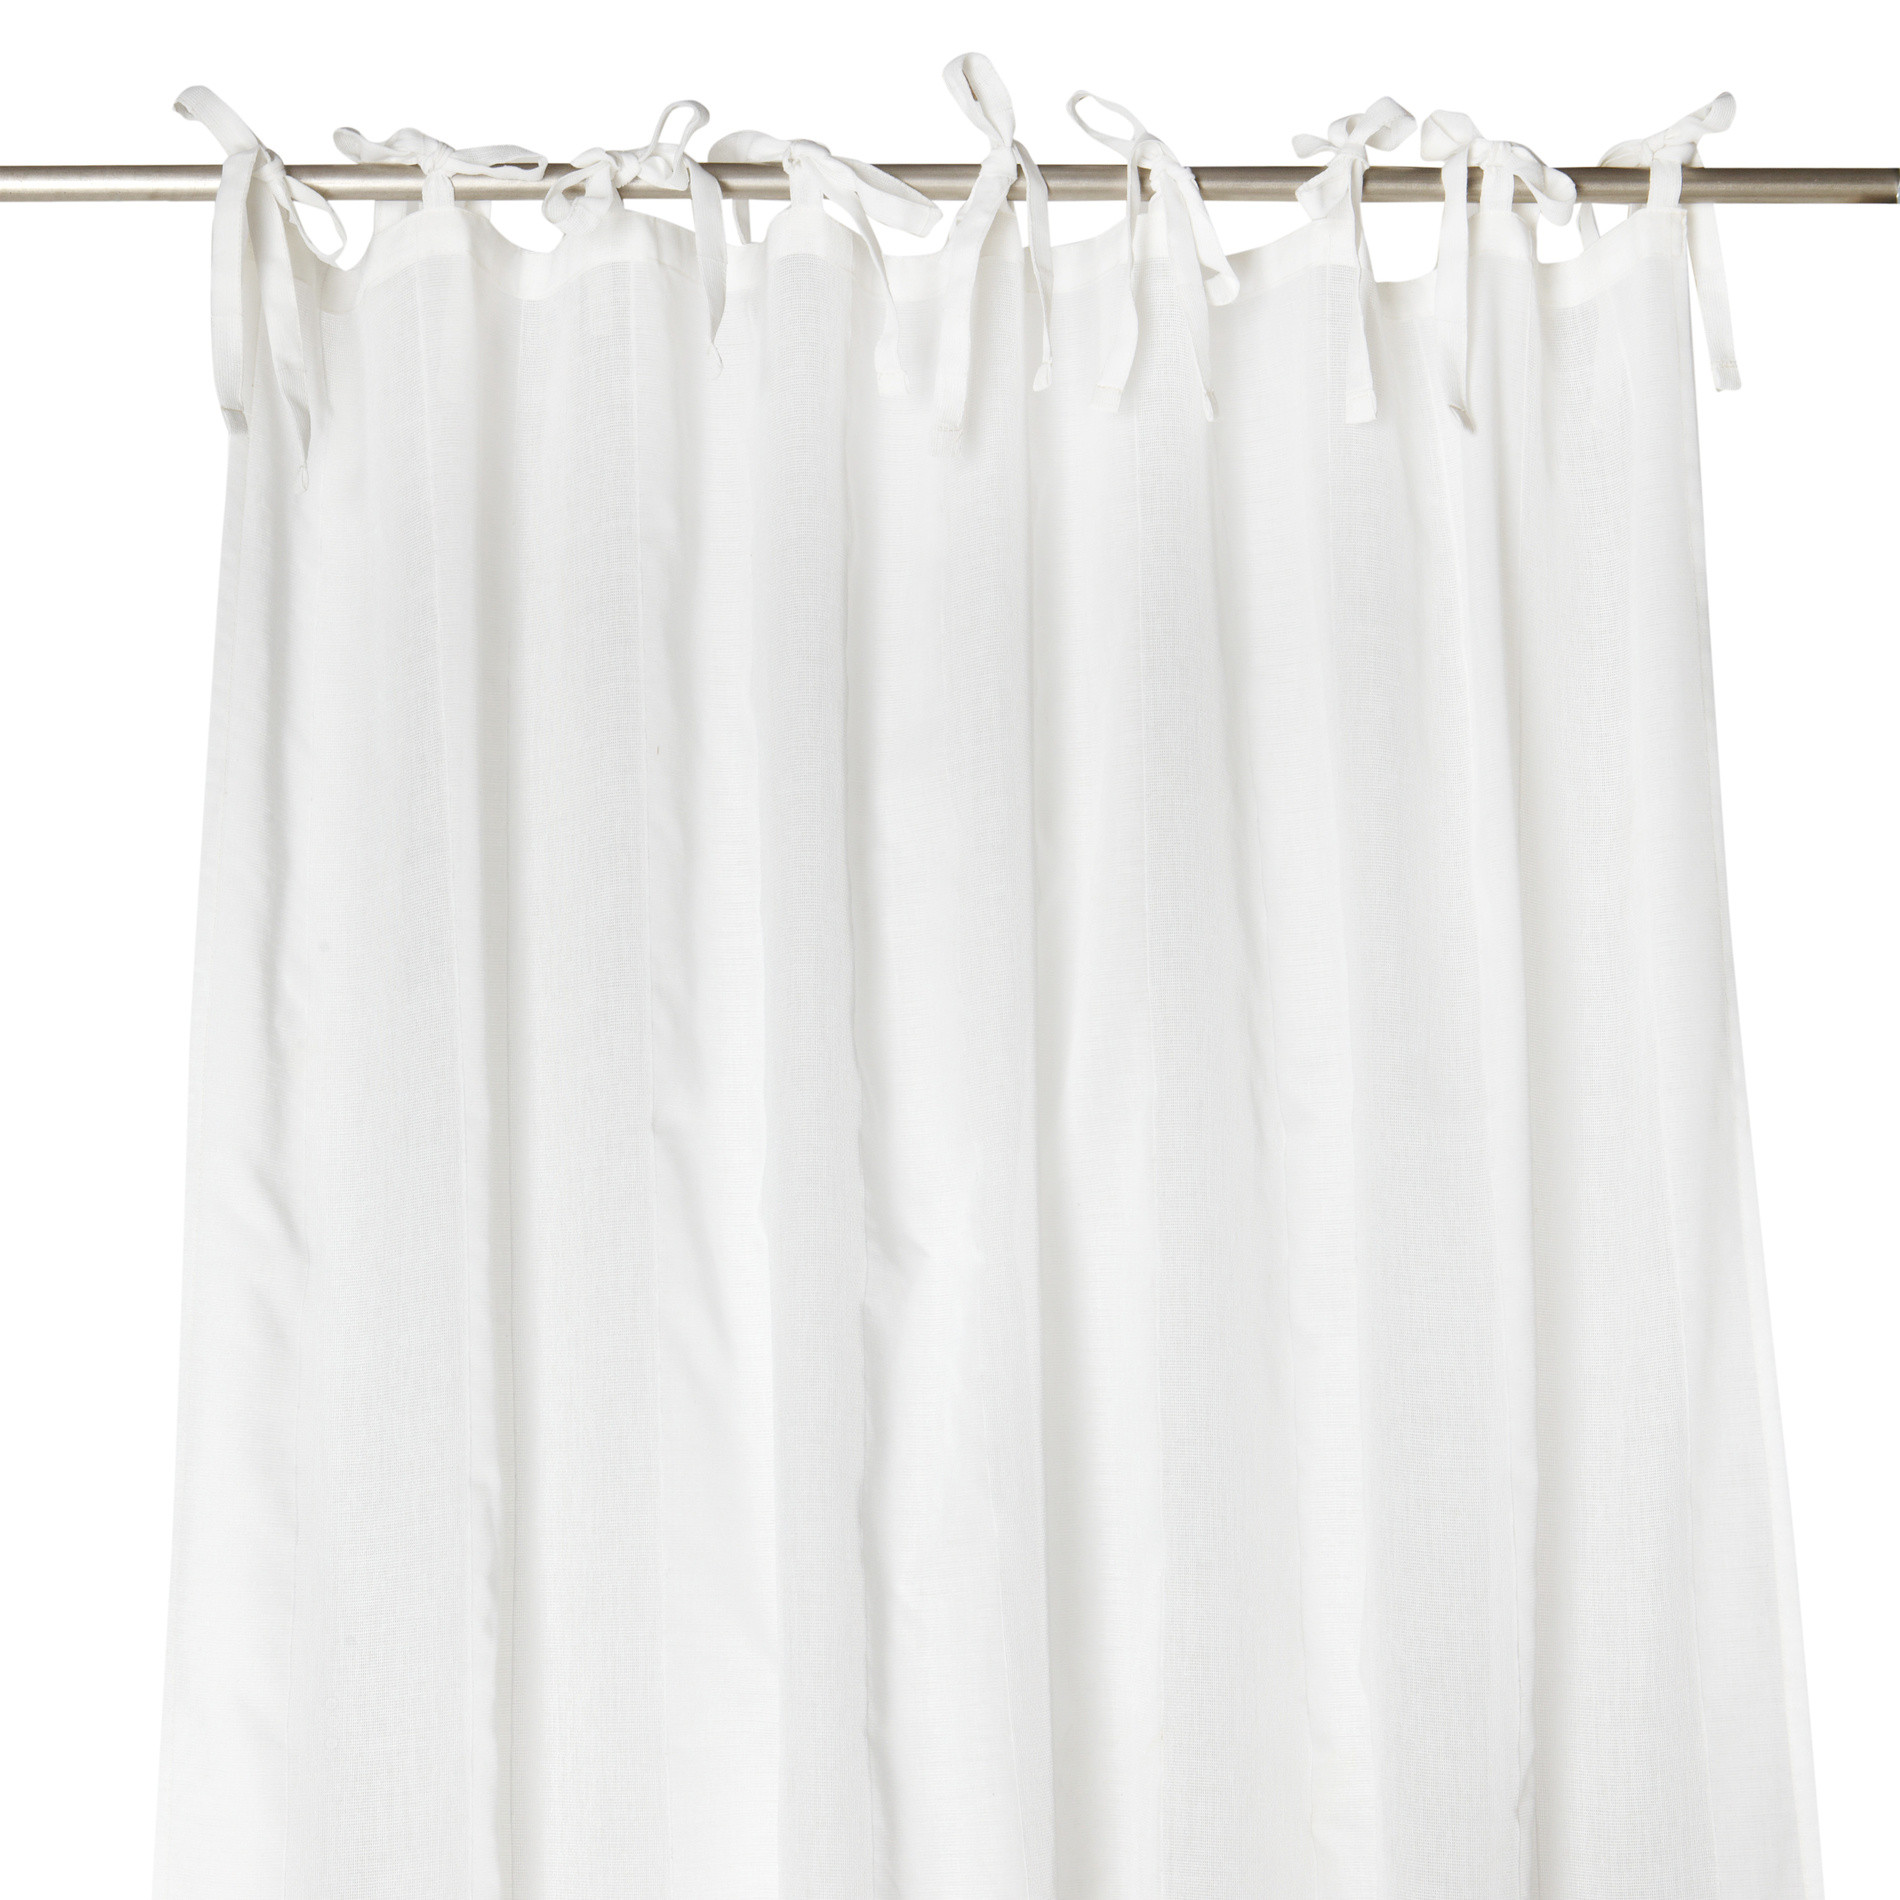 Curtain vertical striped, White, large image number 2